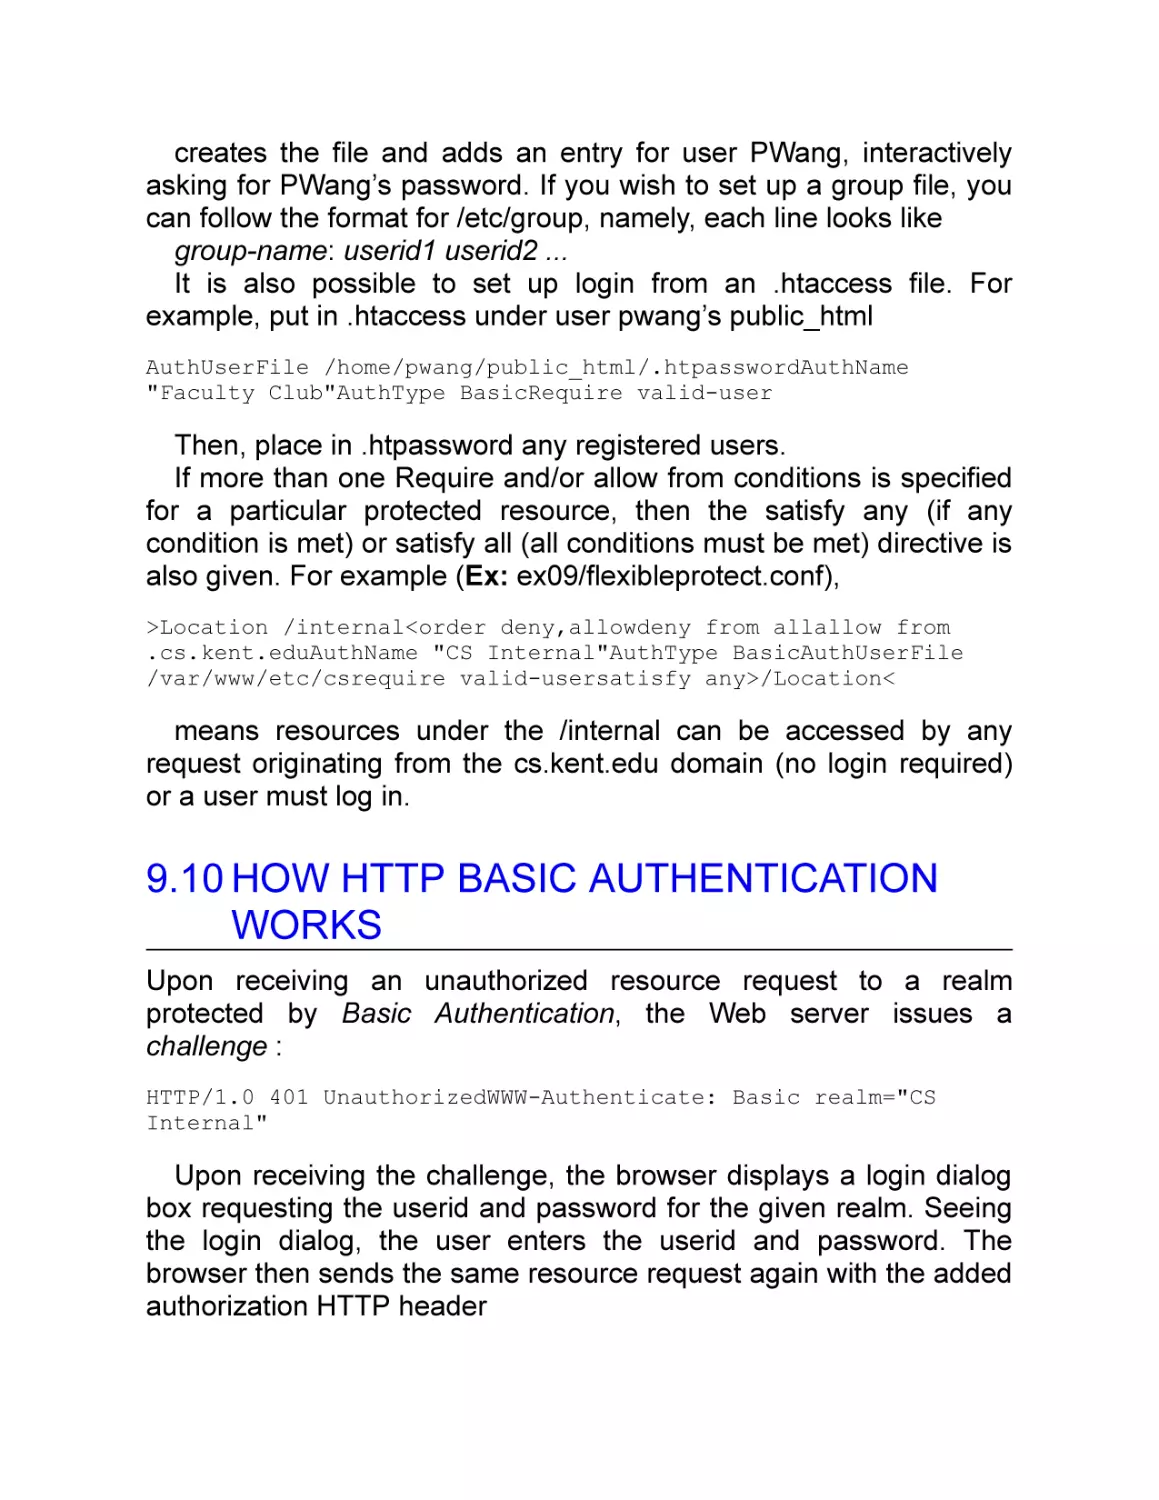 9.10 How HTTP Basic Authentication Works